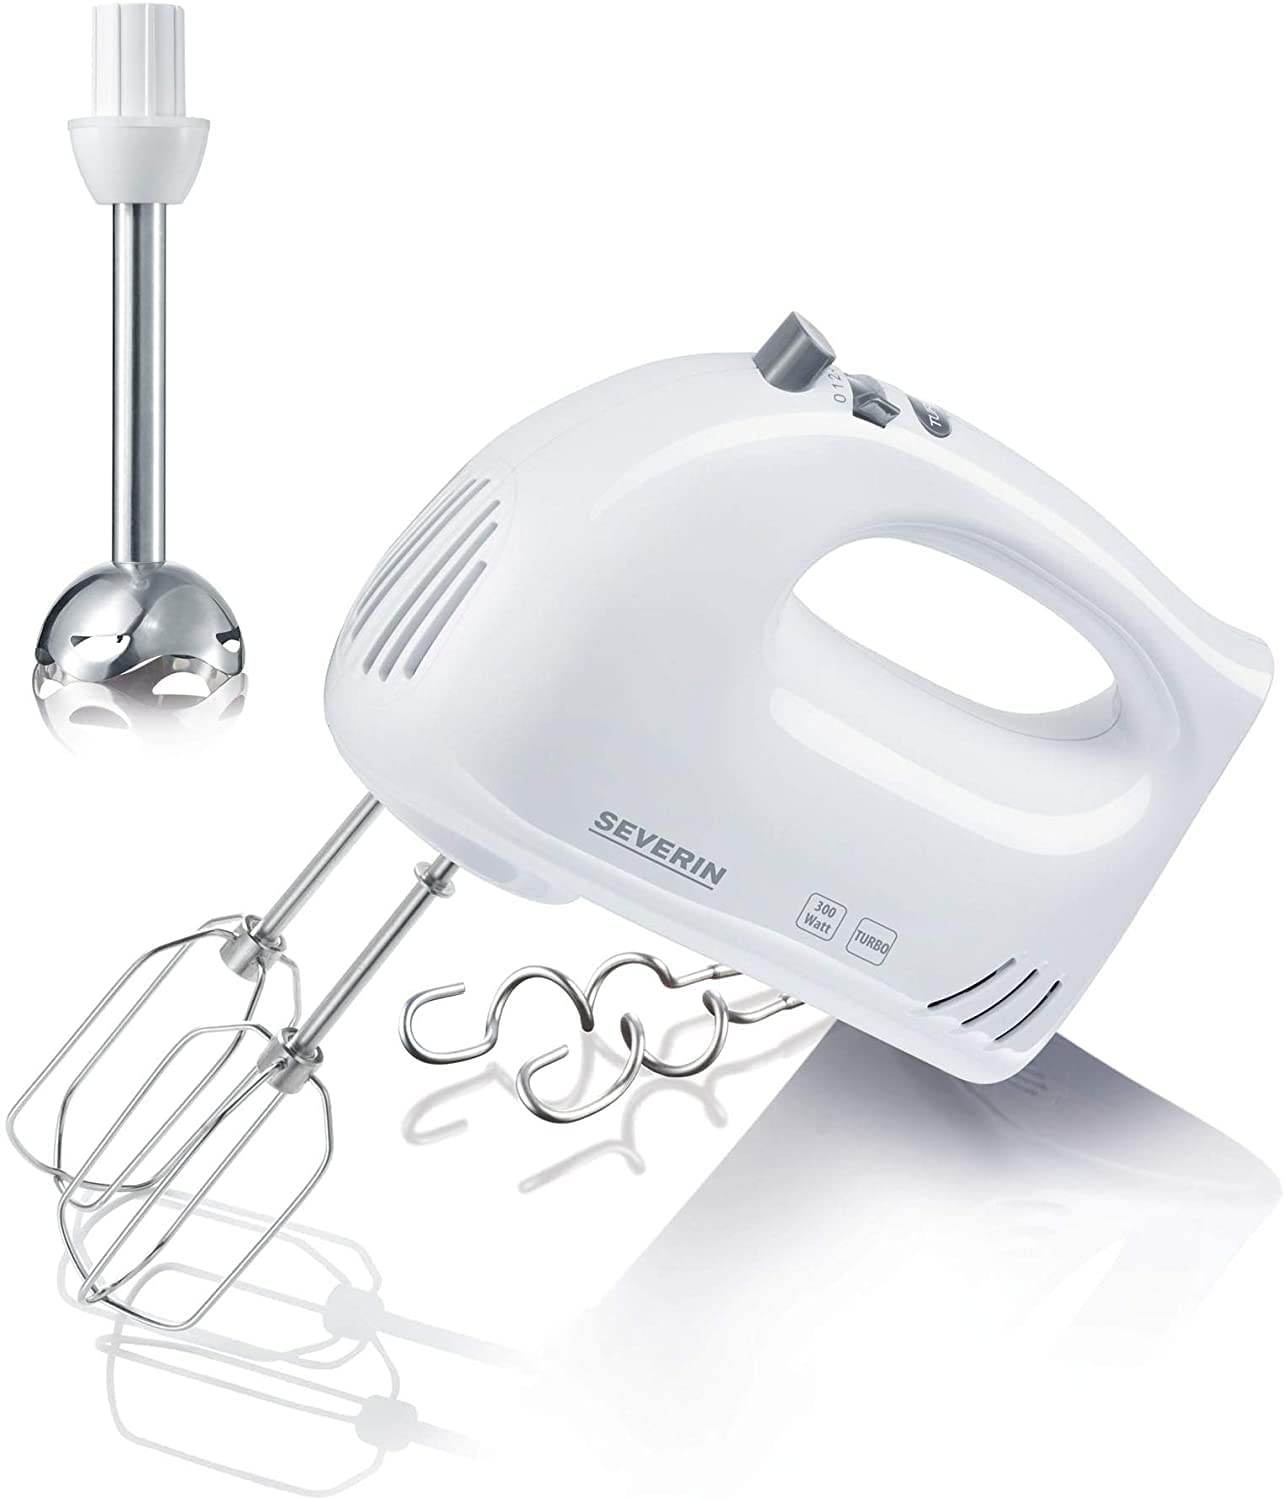 Severin S73822 Hand Blender with Hand Blender Attachment, Approx. 300 W, HM 3822, White/Grey